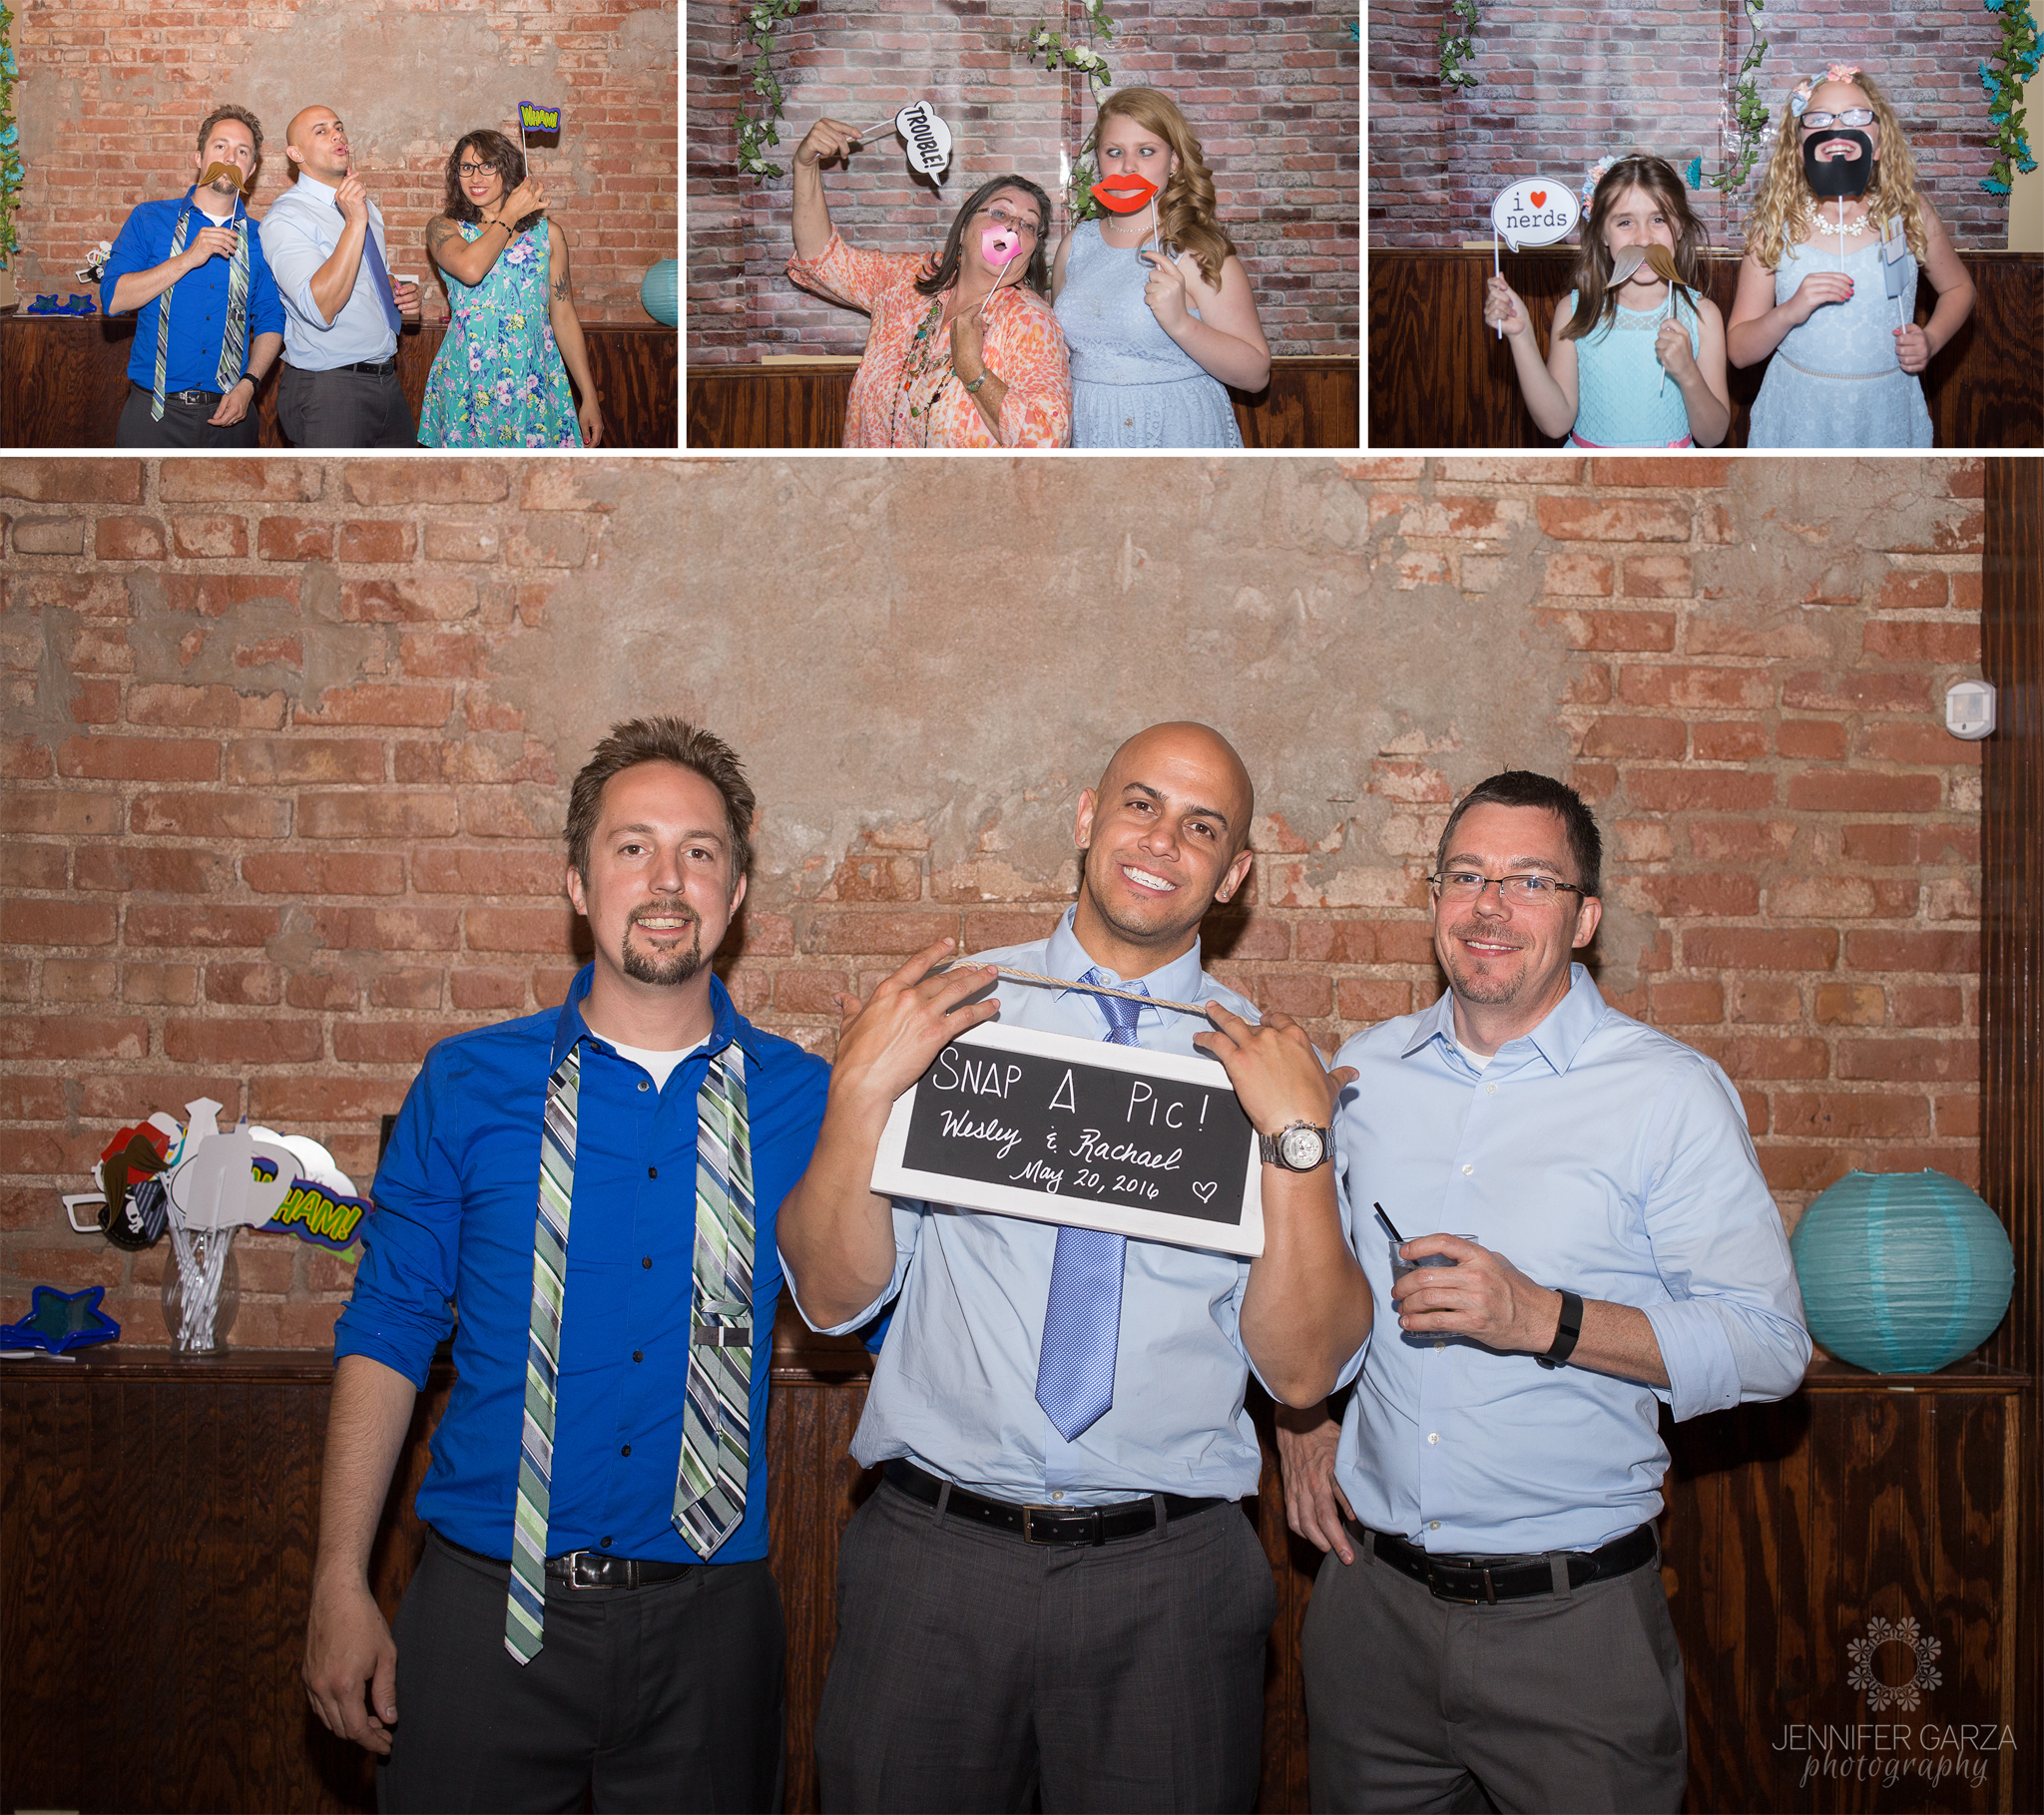 Groom & Guests in the photobooth during a summer wedding at a pub. Rachael & Wes' Wash Park and Irish Rover Pub Denver Wedding by Colorado Wedding Photographer, Jennifer Garza. Colorado Wedding Photographer, Denver Wedding Photographer, Colorado Wedding Photos, Denver Wedding Photos, Colorado Bride, Denver Bride, Wash Park Wedding, Wash Park, Irish Rover Pub, Irish Rover Pub Wedding, Pub Wedding, Park Wedding